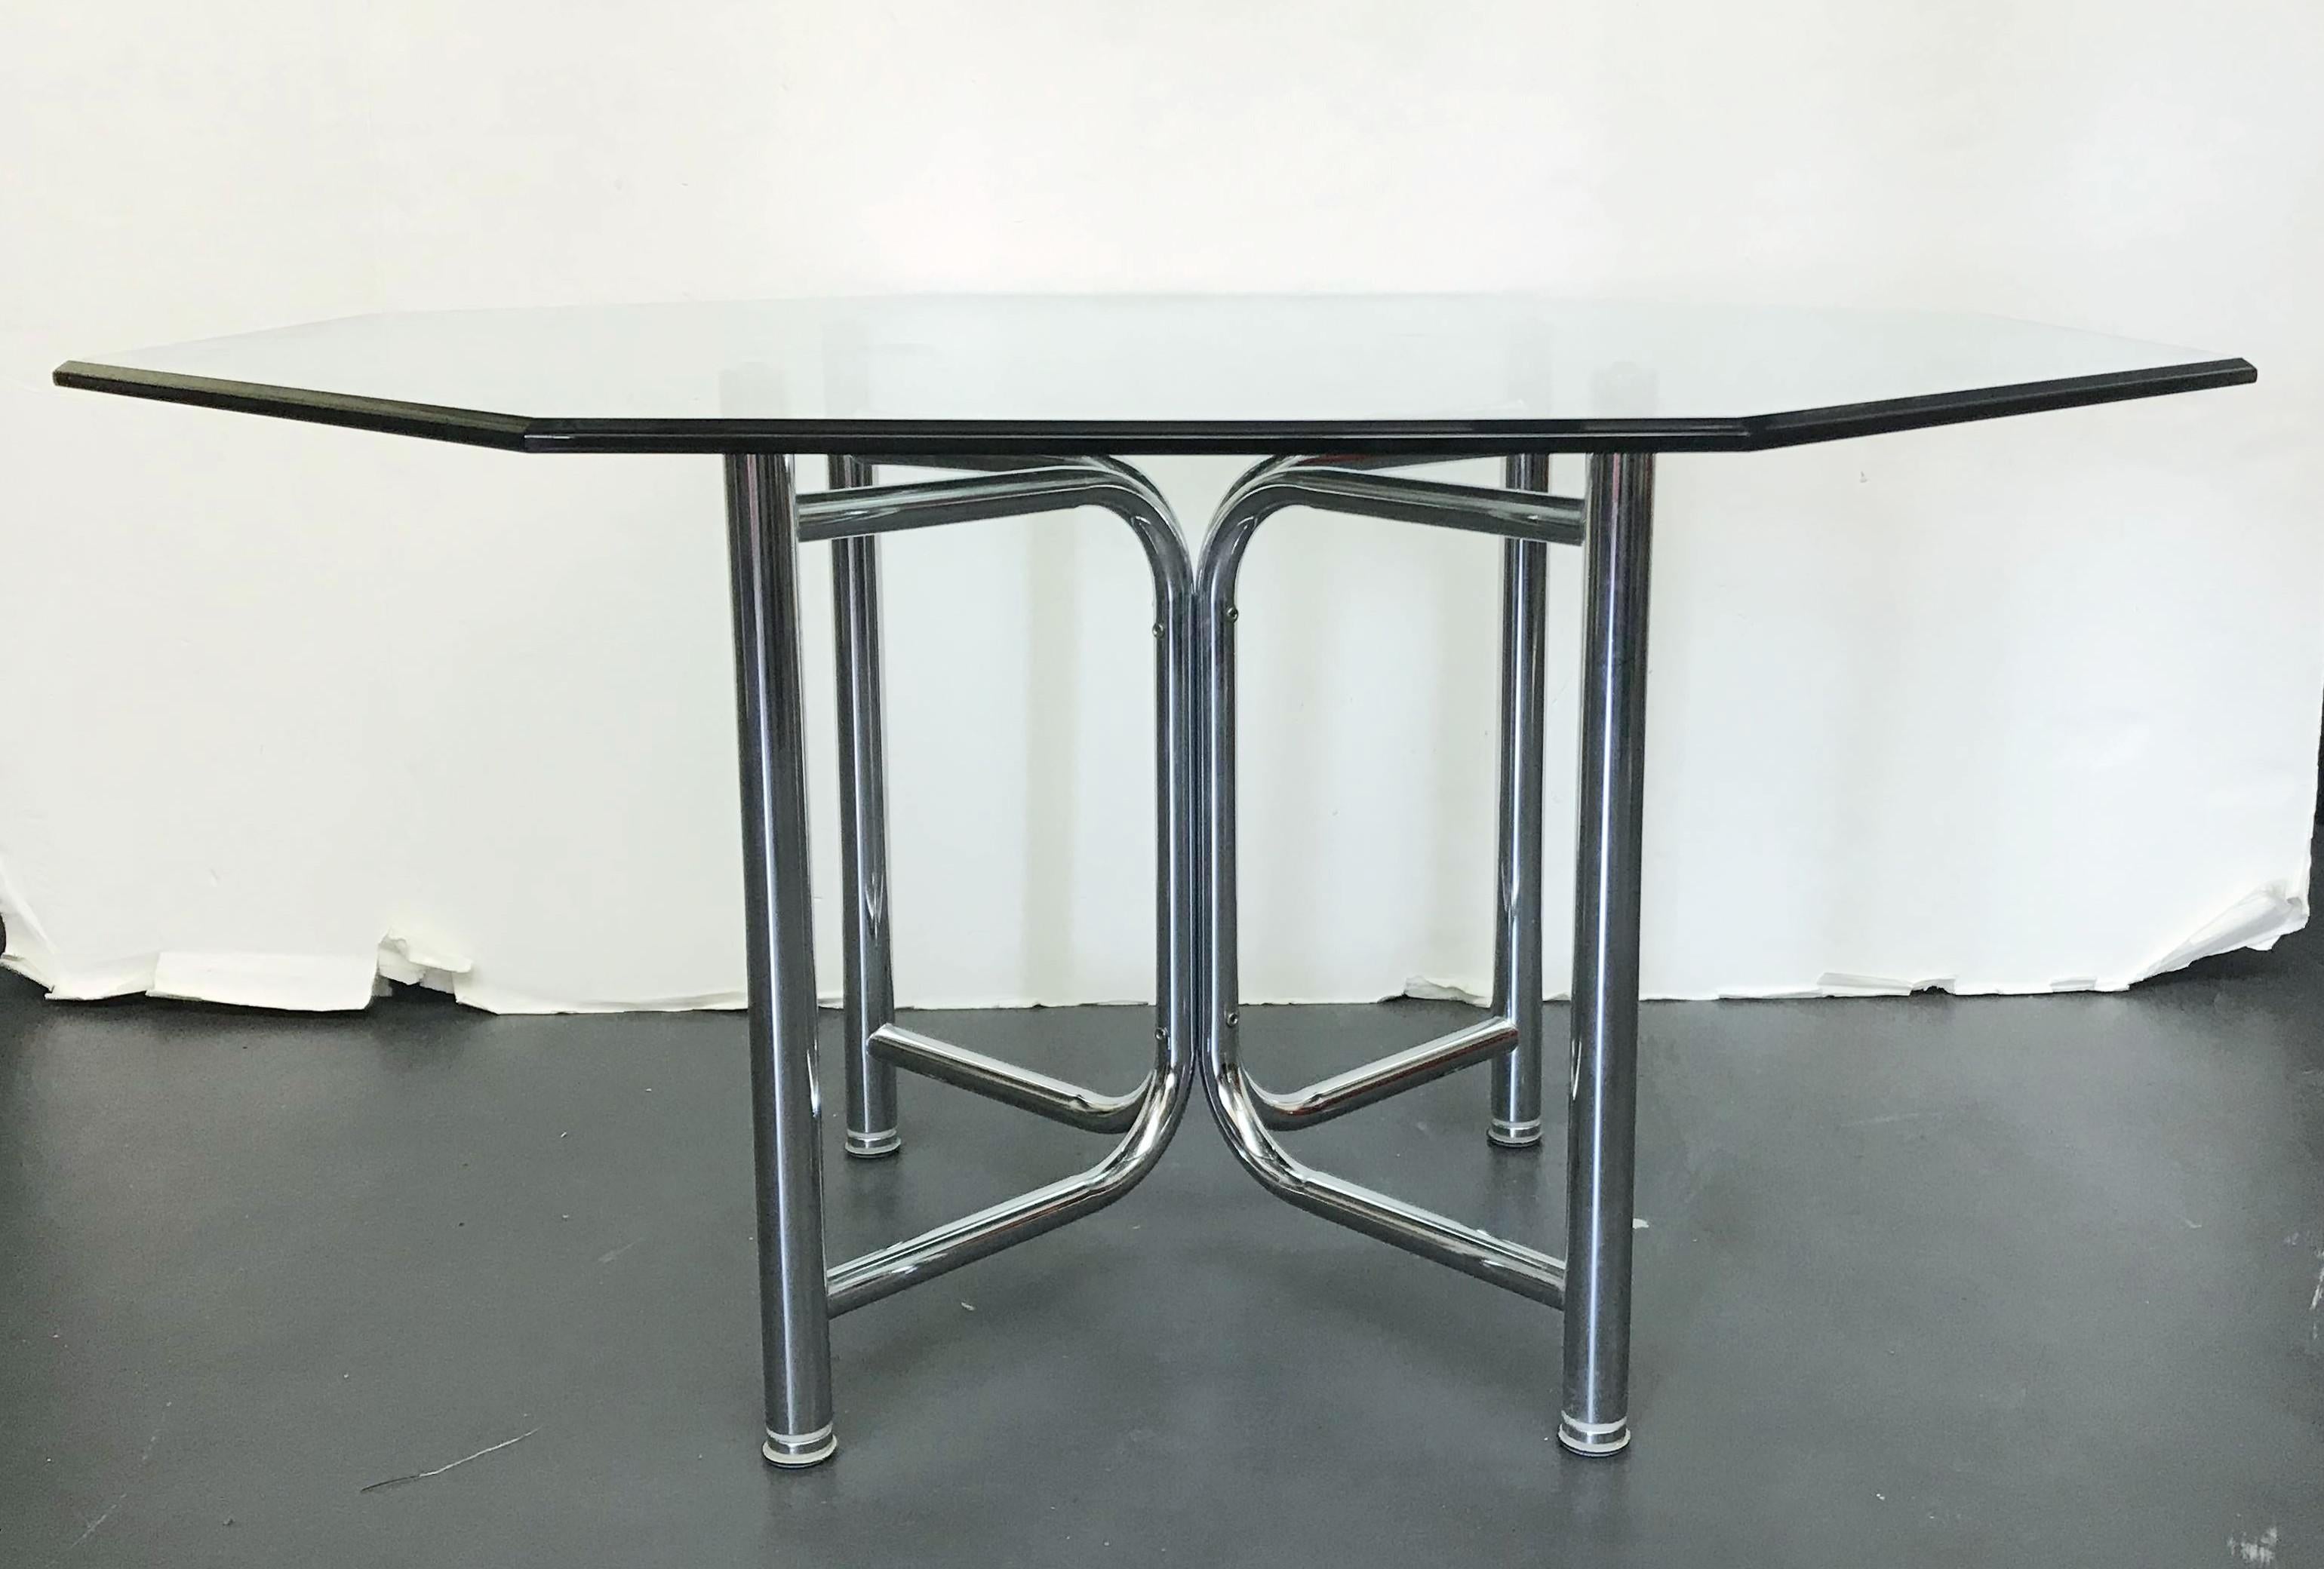 Vintage dining table with curved tubular chrome base supporting a thick octagonal beveled glass top / made in the USA, circa 1970s.
Measures: Diameter 58 inches, height 29 inches
1 available in stock in Palm Springs ON FINAL CLEARANCE SALE for